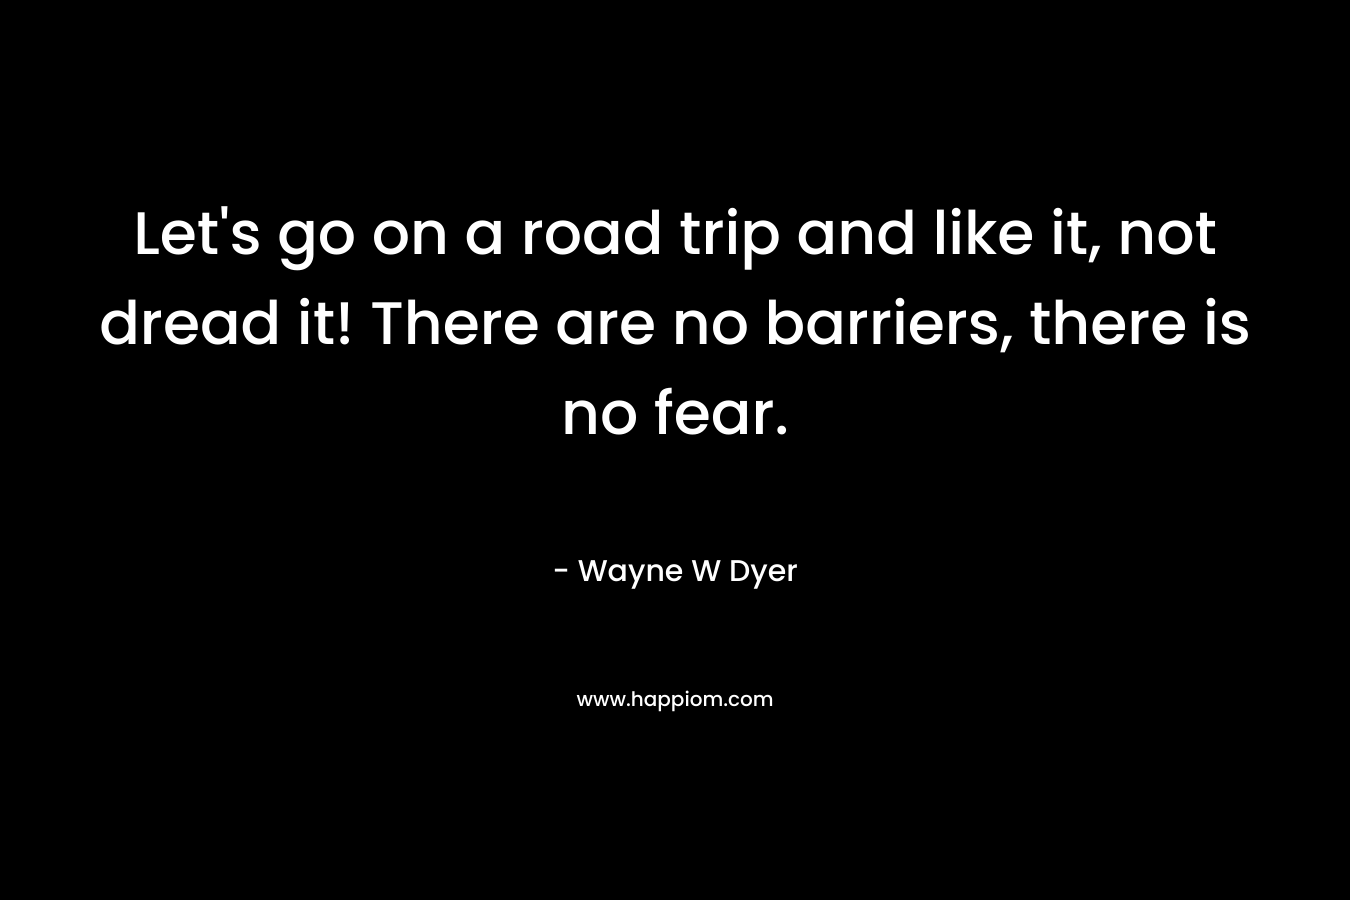 Let's go on a road trip and like it, not dread it! There are no barriers, there is no fear.